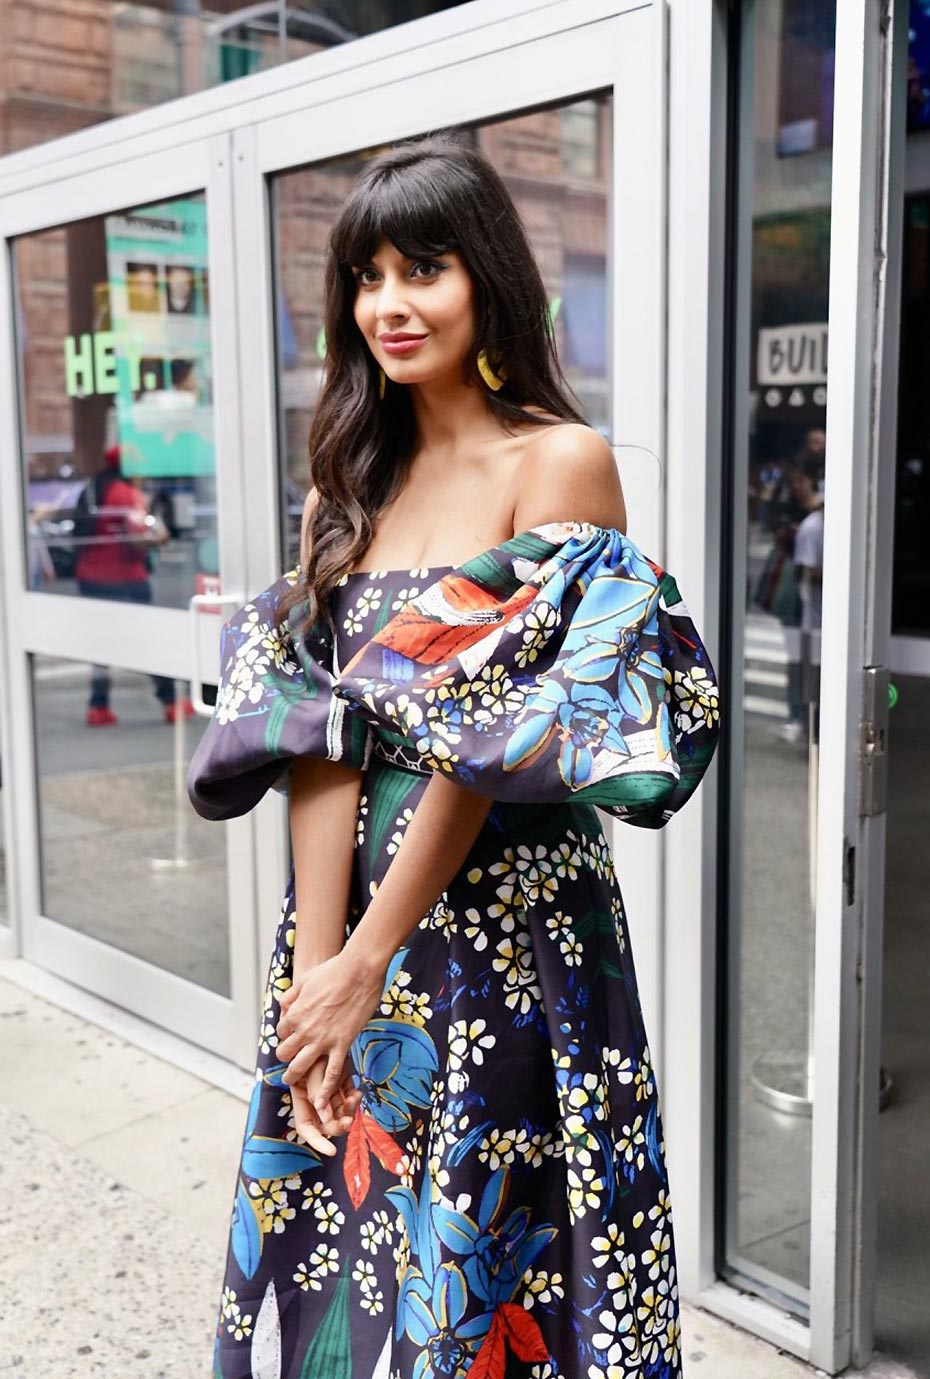 Jameela jamil sexy 🍓 Jameela jamil sexy 👉 👌 Jameela Jamil re